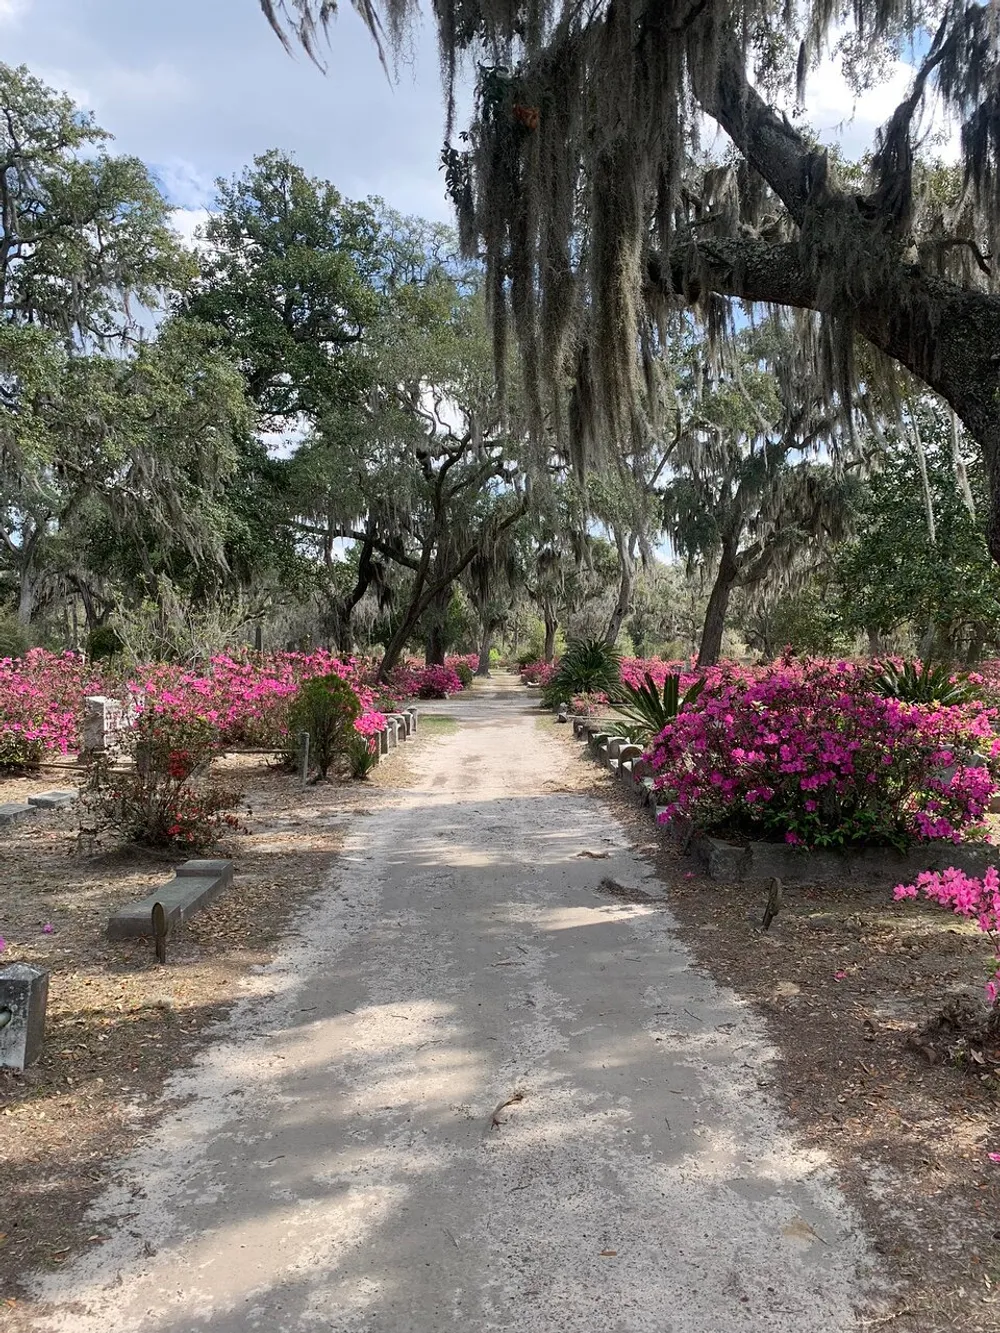 The image shows a peaceful pathway through a cemetery adorned with Spanish moss-draped oak trees and vibrant pink azalea bushes under a partly cloudy sky